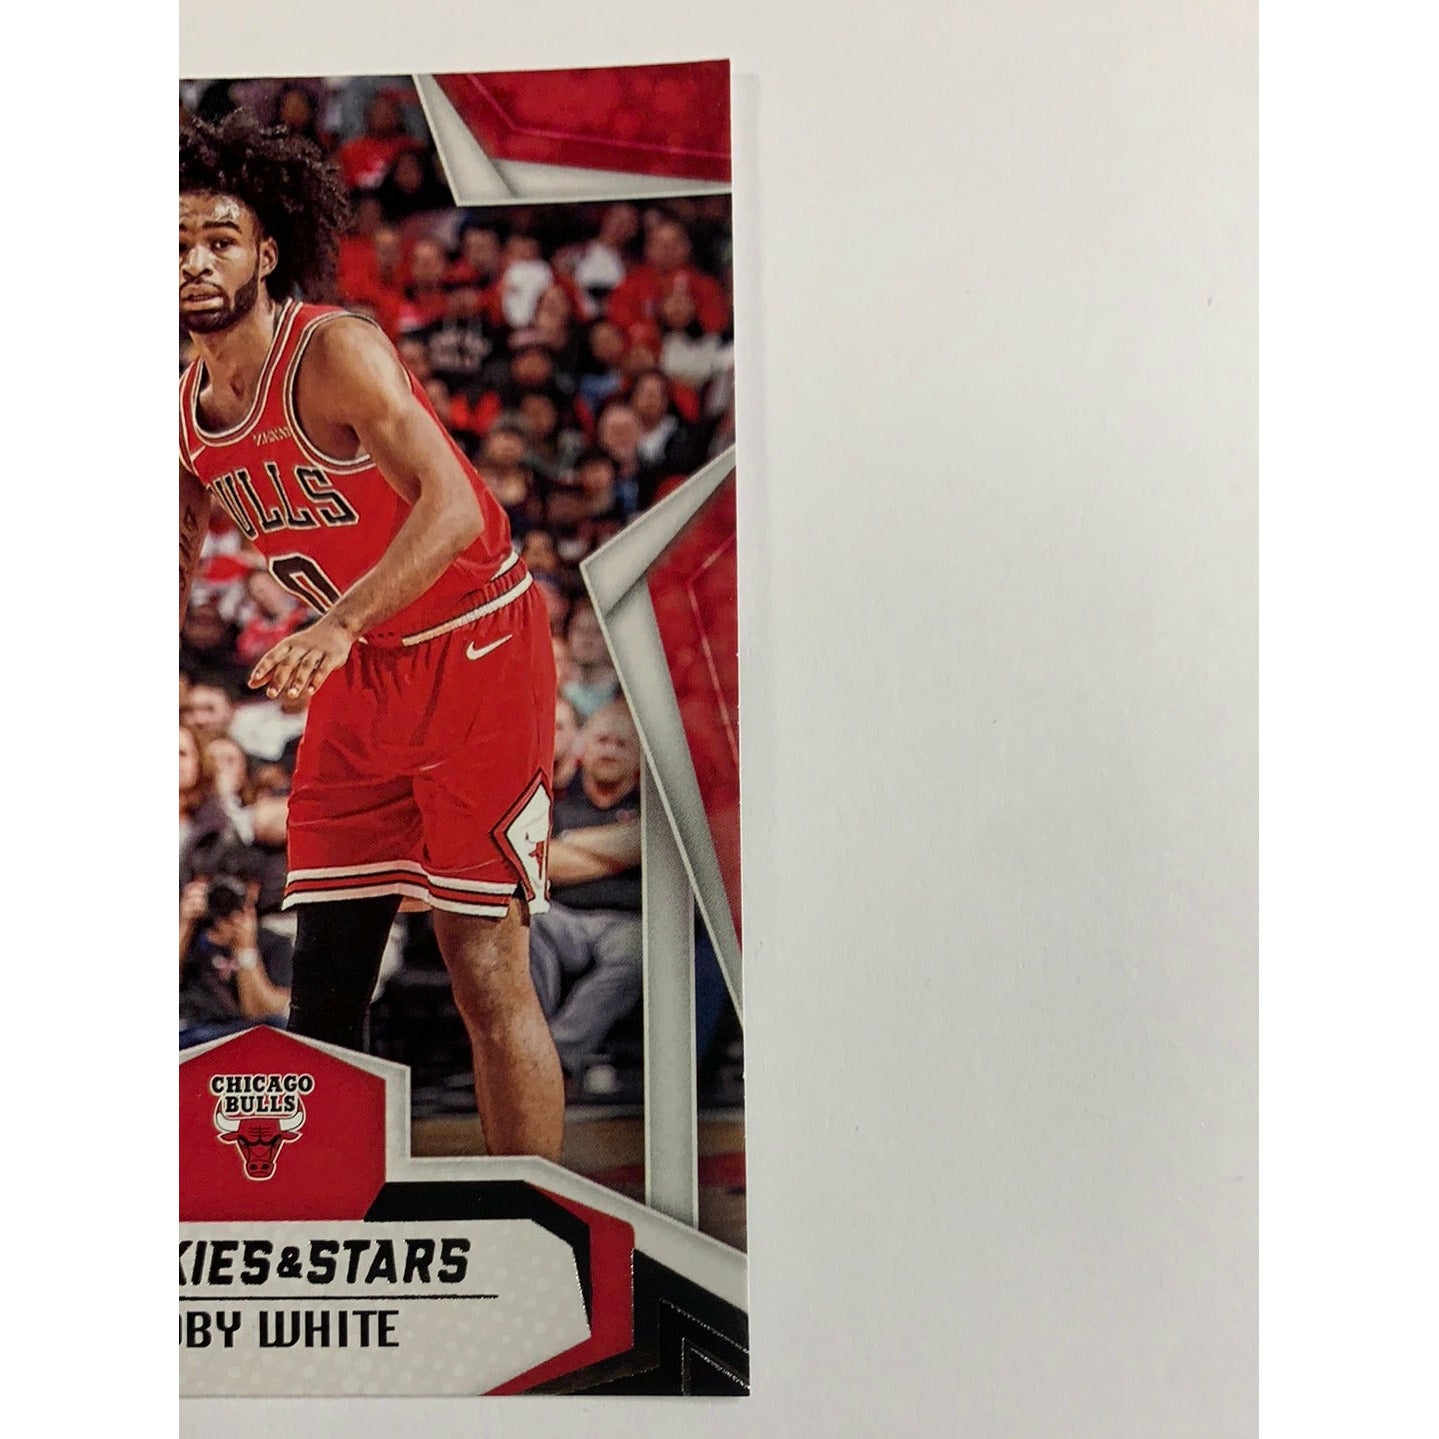 2019-20 Rookies And Stars Coby White RC